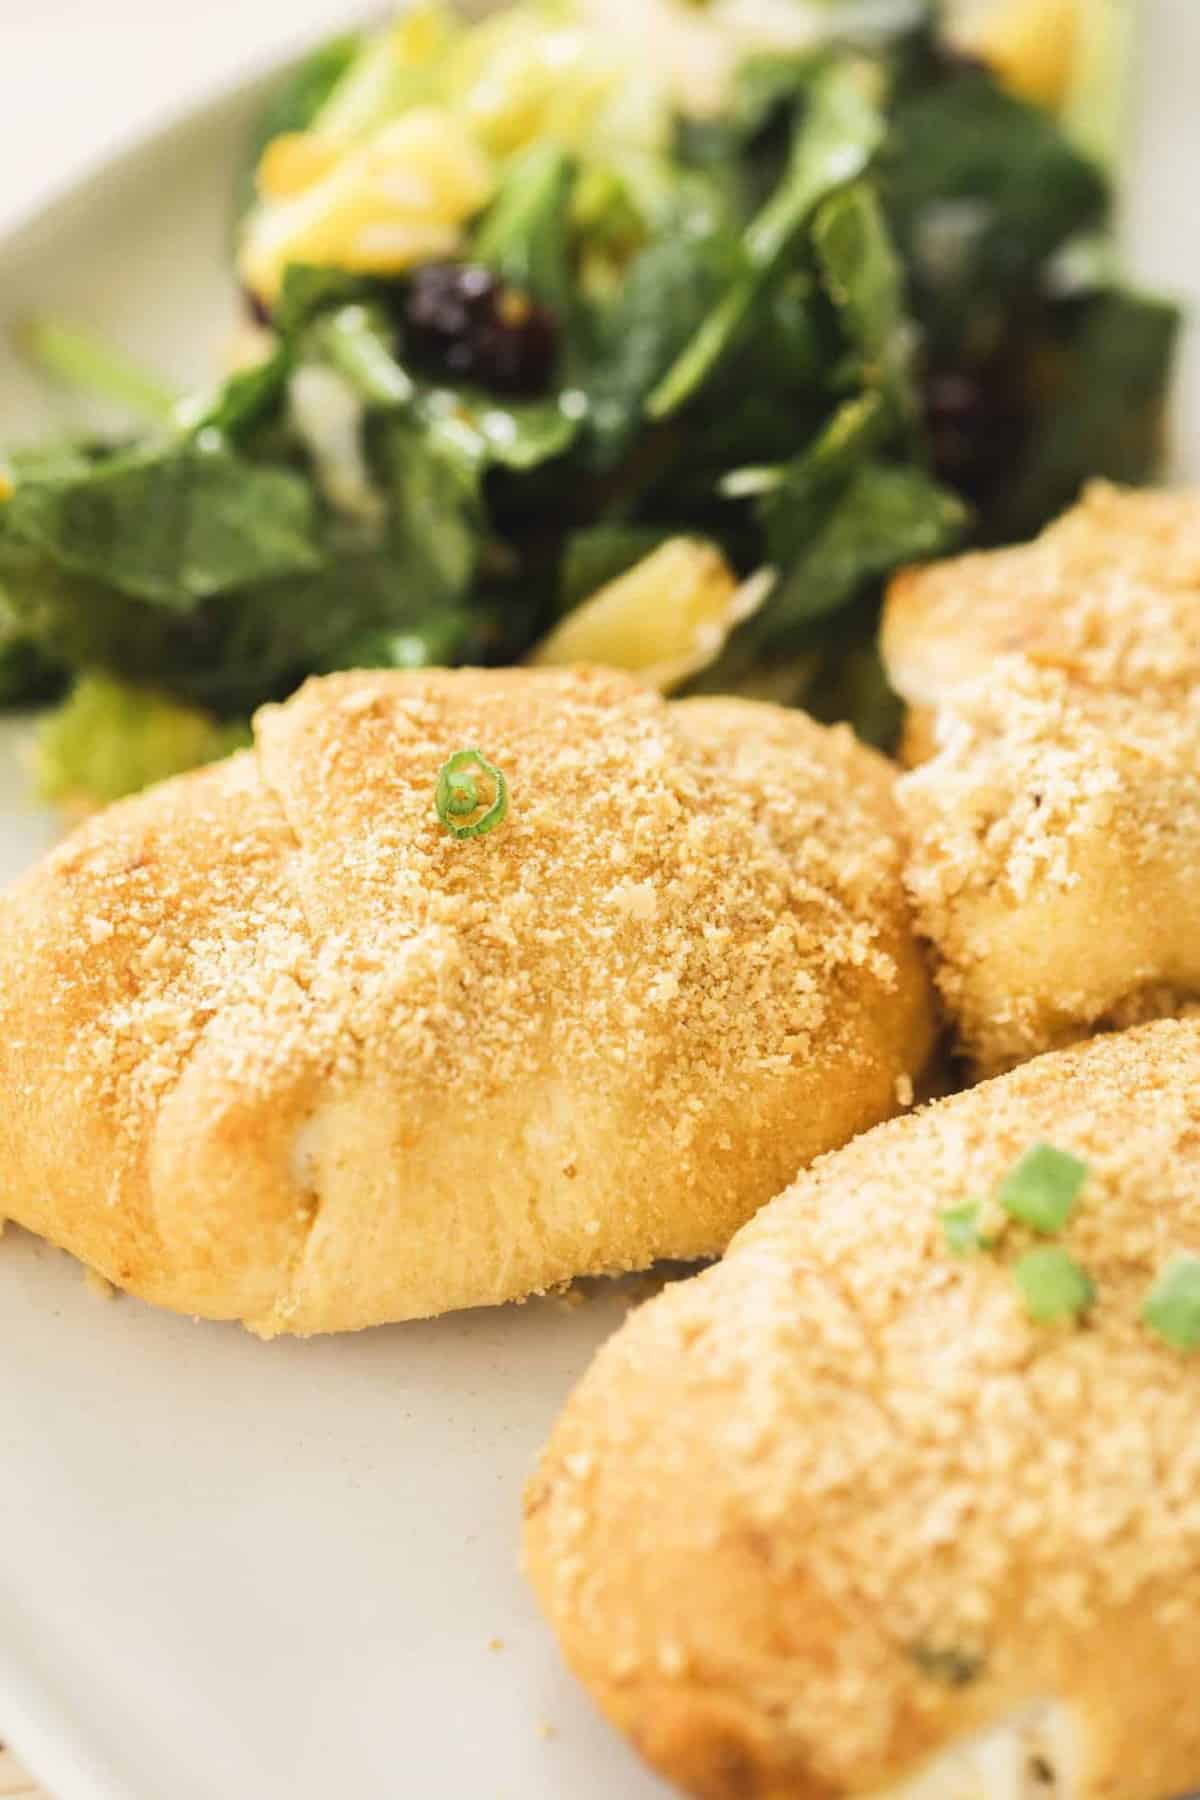 Three Chicken Crescent Roll Ups sit on a plate alongside a fresh salad.